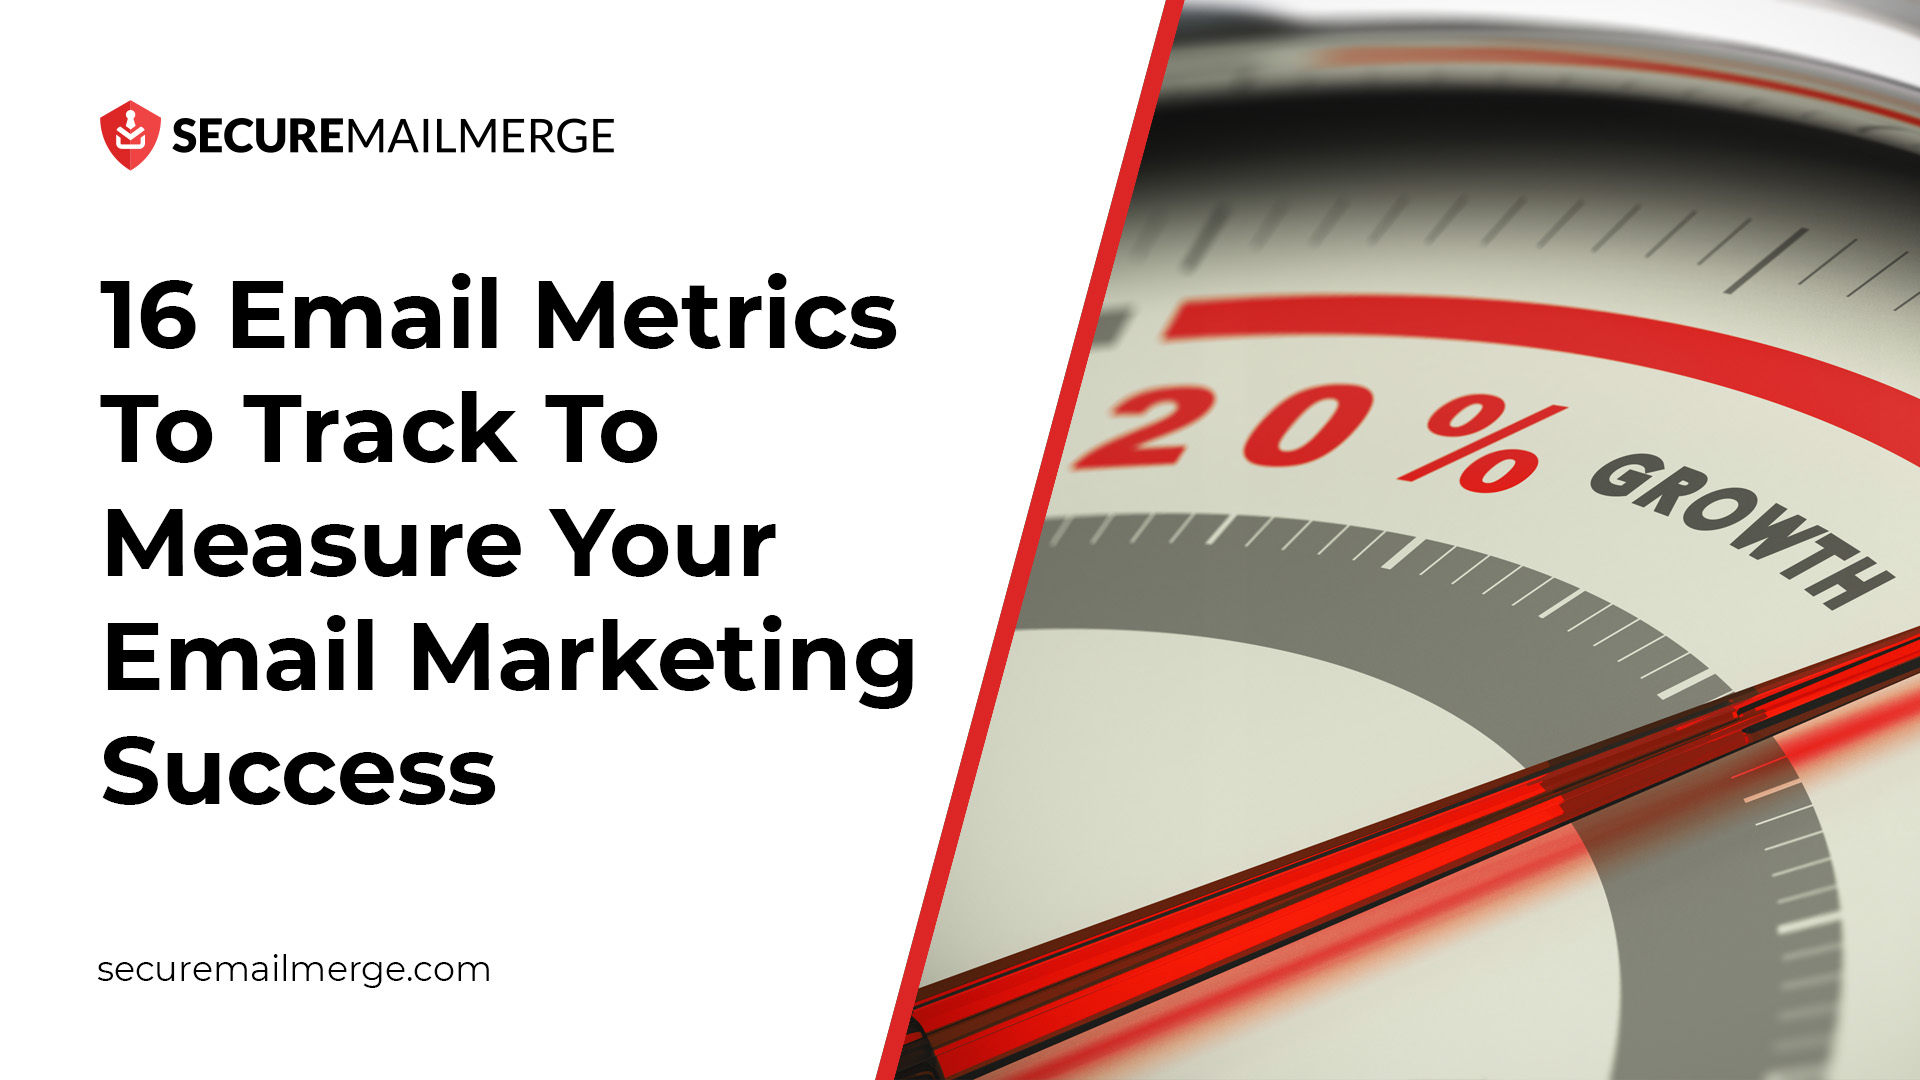 16 Email Metrics To Track To Measure Your Email Marketing Success